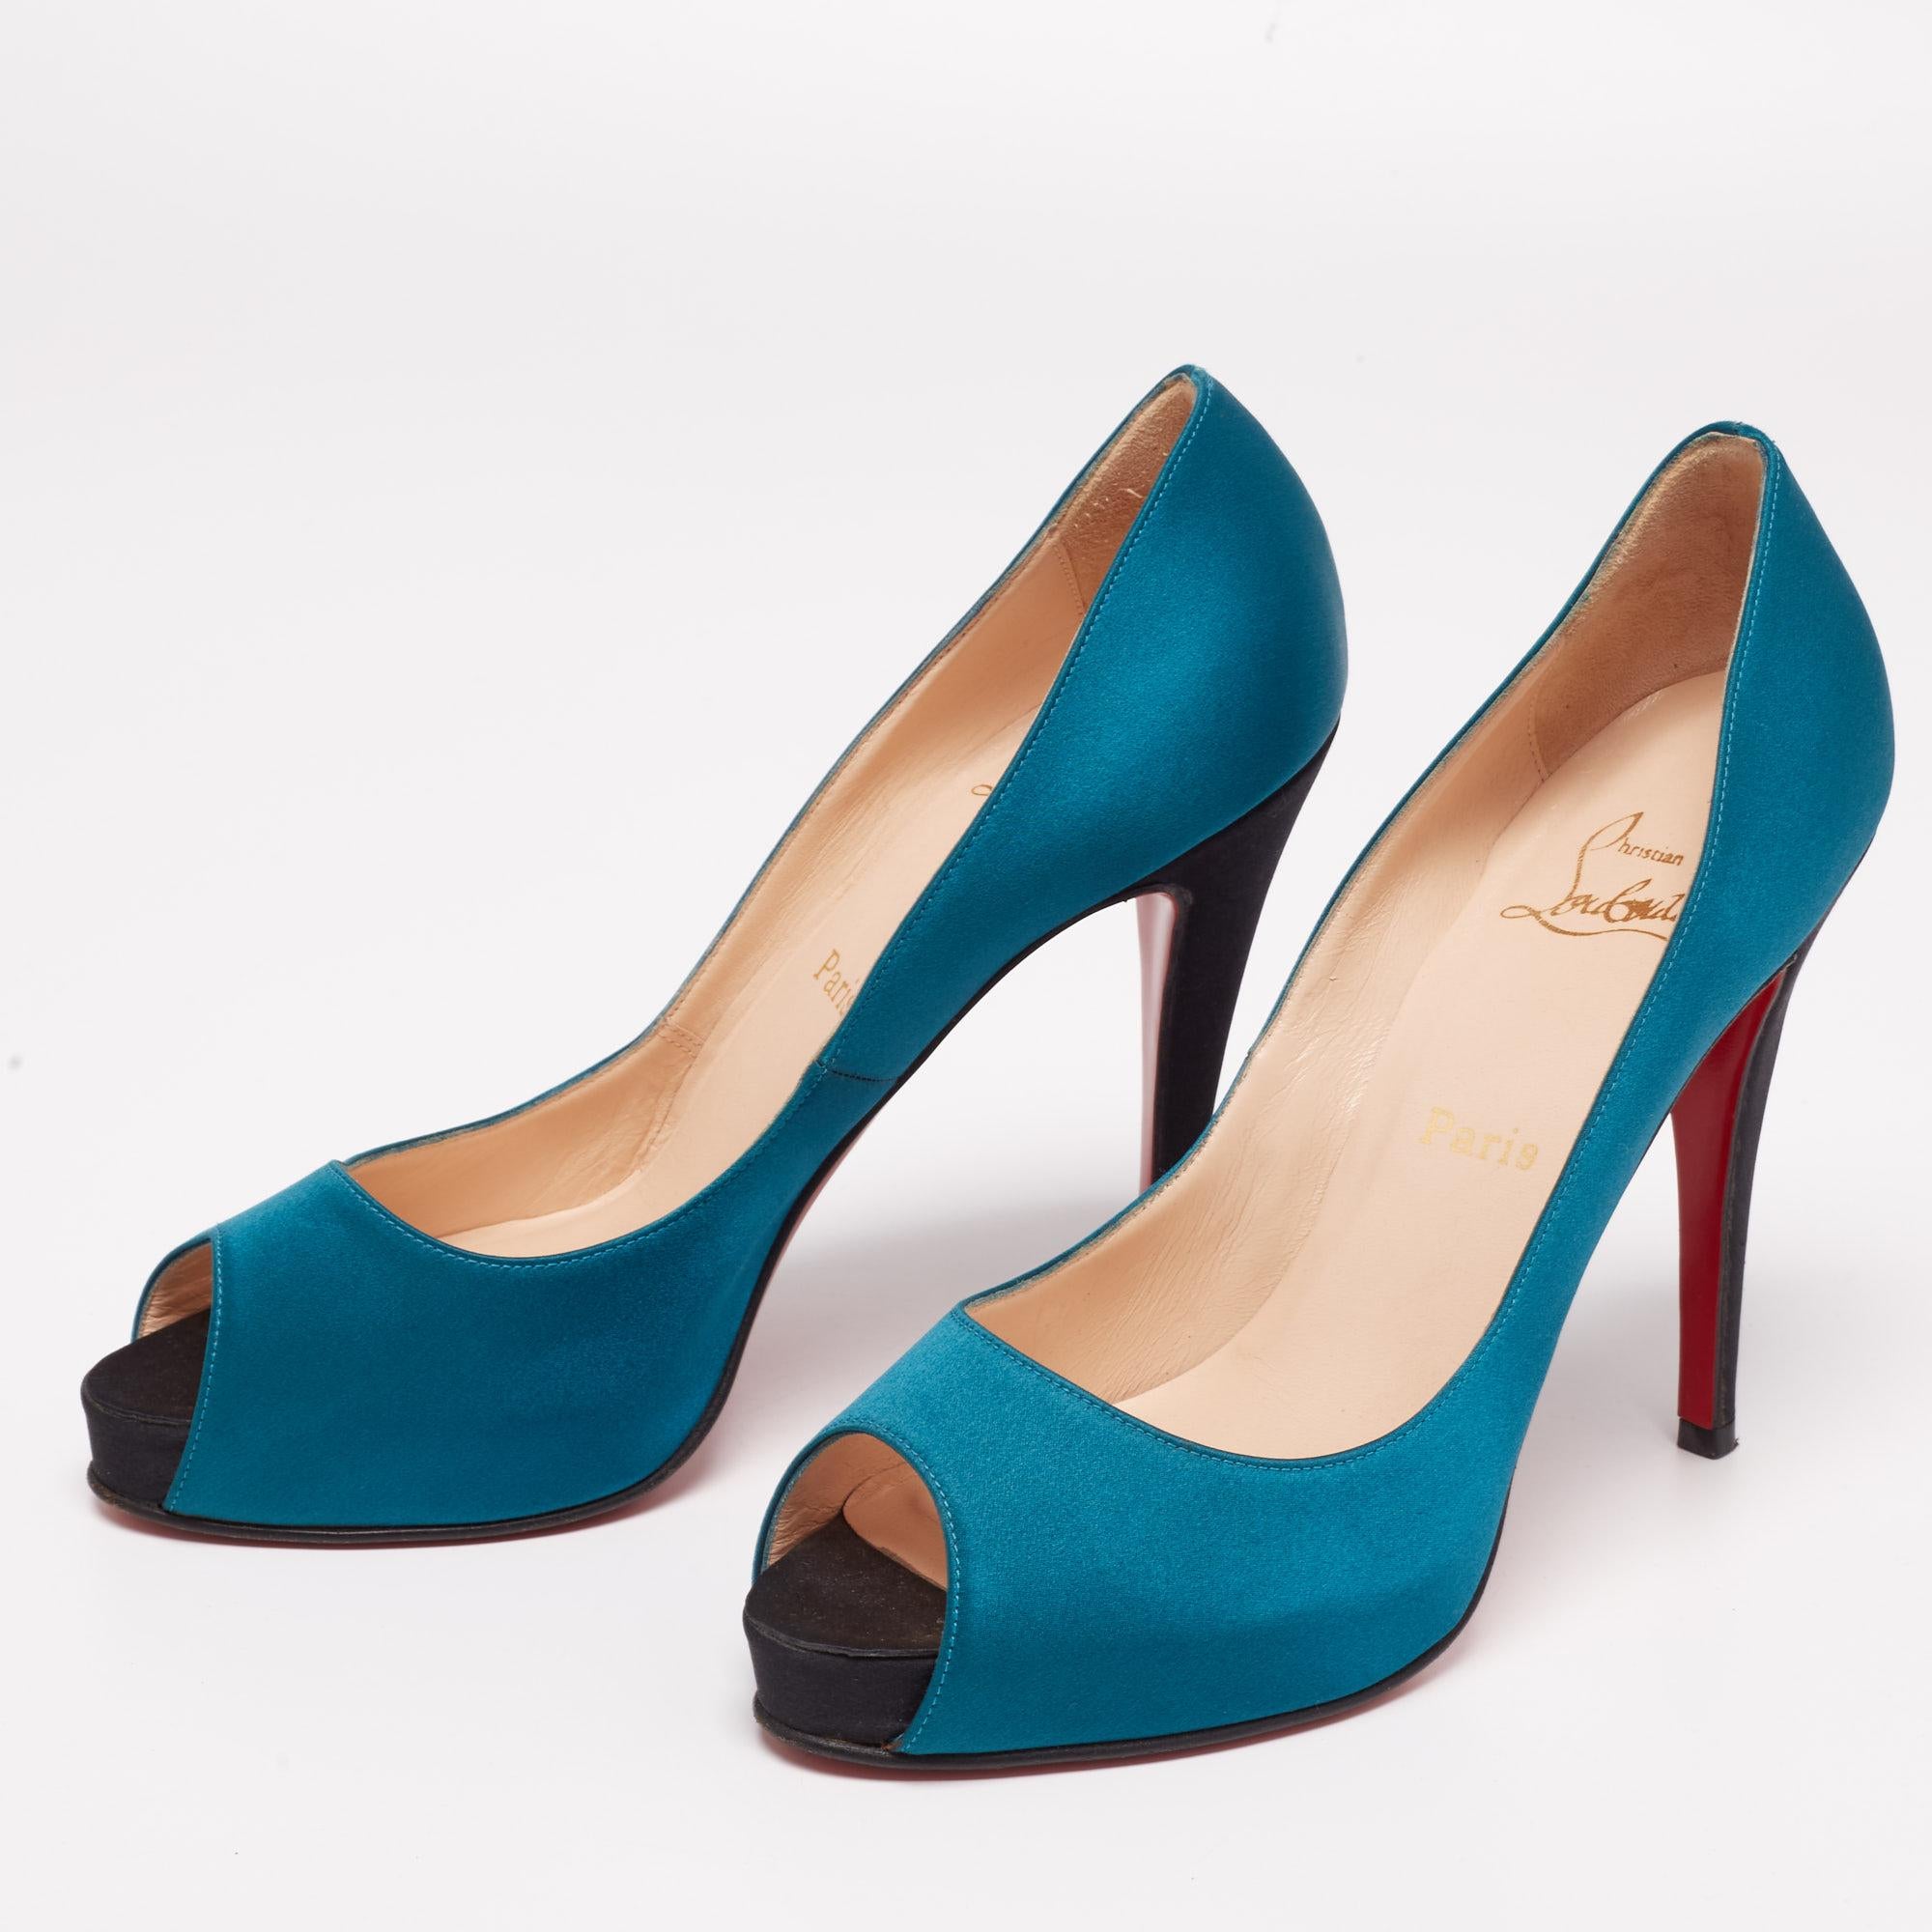 Exhibiting a chic silhouette enhanced with excellence, these Very Prive pumps from the House of Christian Louboutin exude signatory style! They are designed using blue-black satin on the exterior. These pumps have slim heels, peep-toes, platforms,